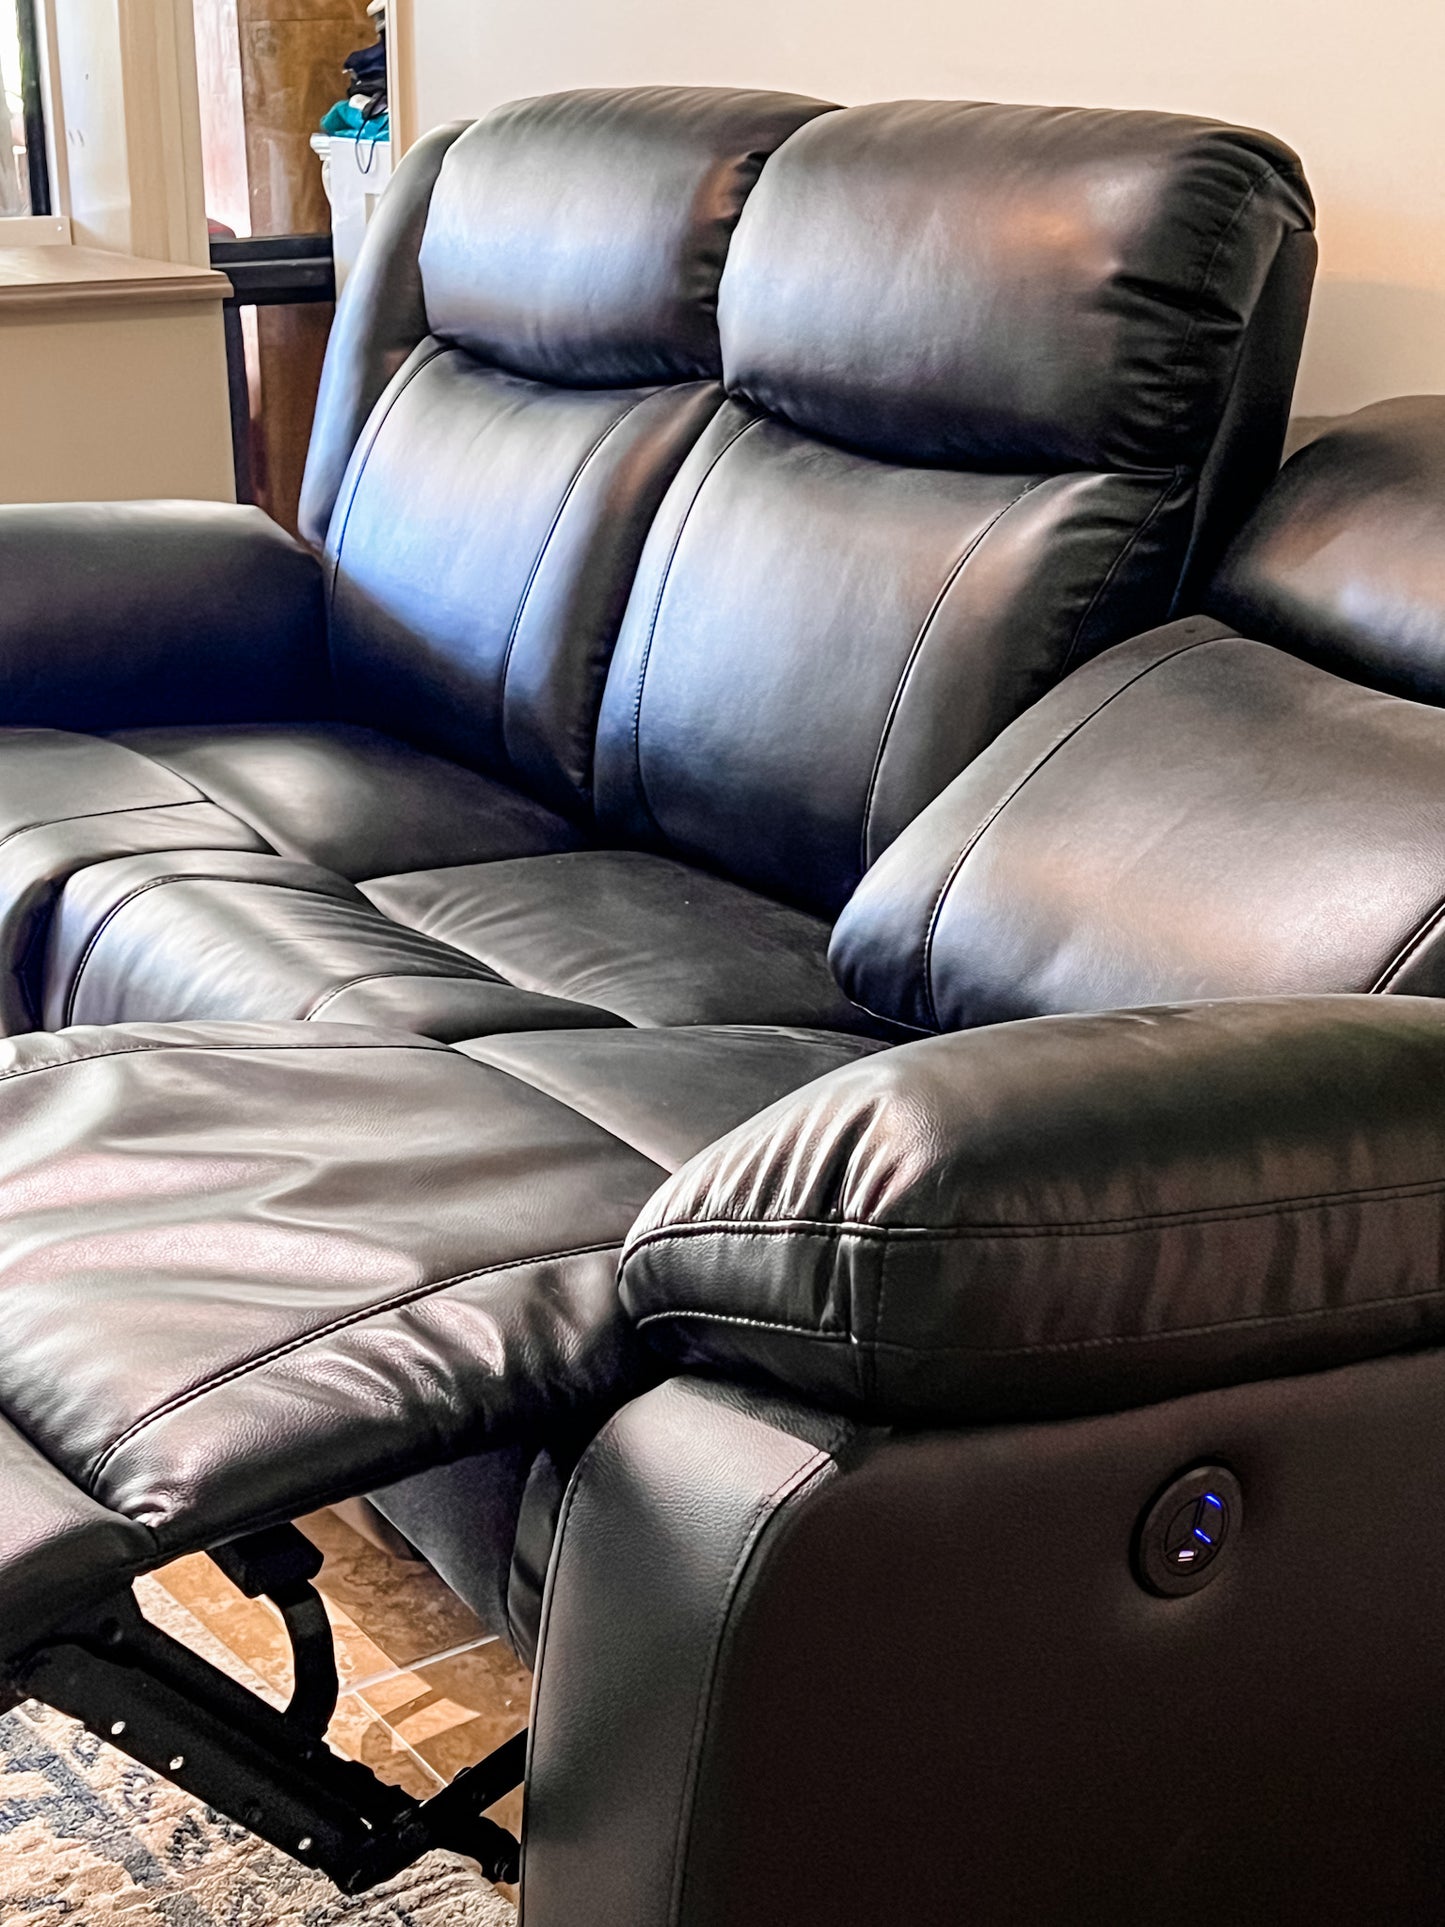 Cinema Couch - 3 Seater, 2 Seater Package Deal